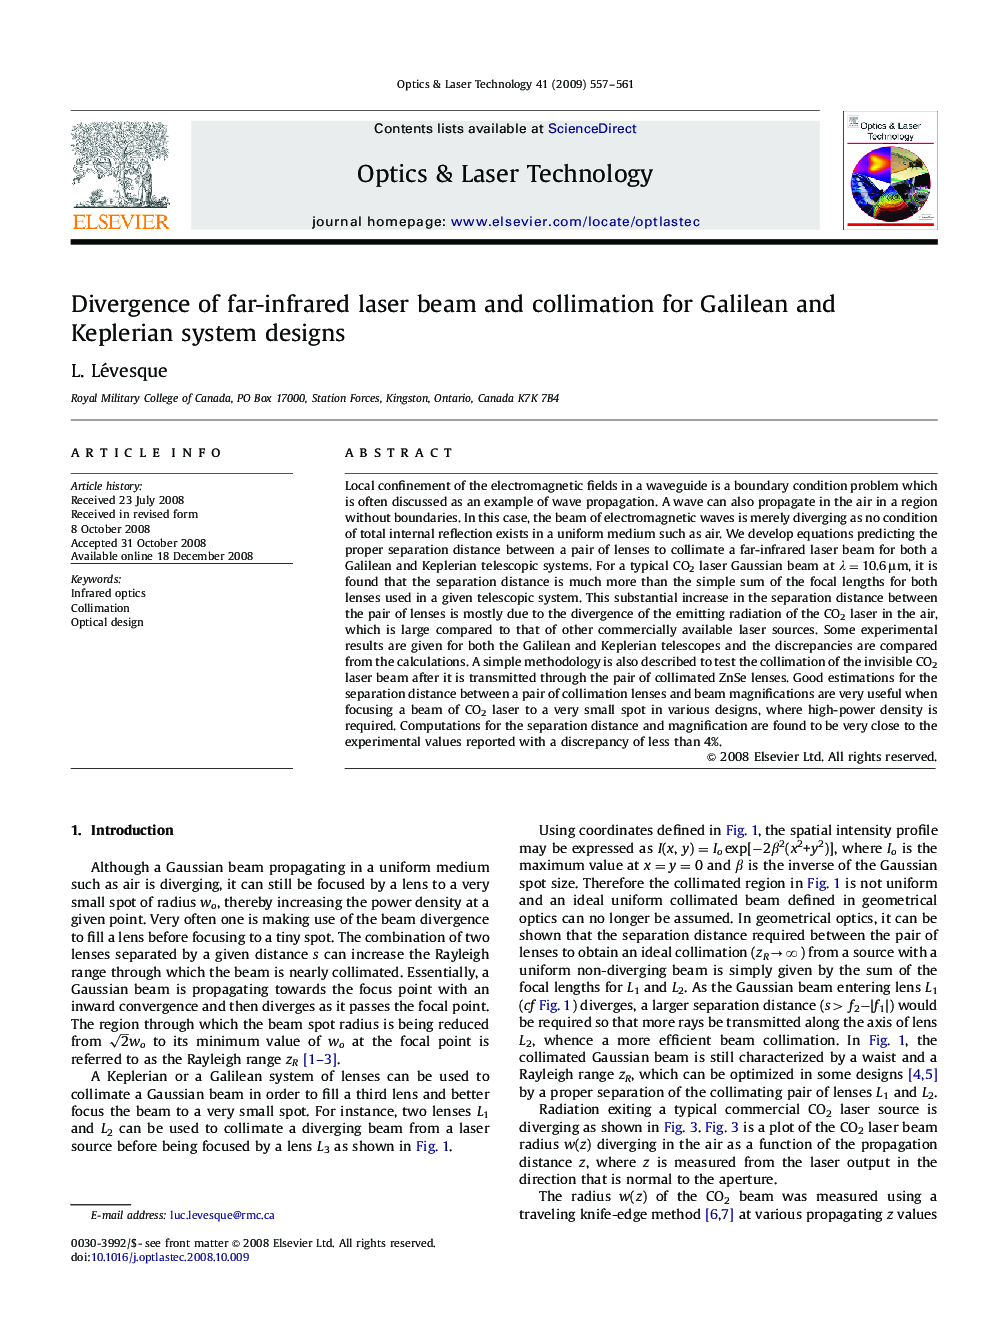 Divergence of far-infrared laser beam and collimation for Galilean and Keplerian system designs